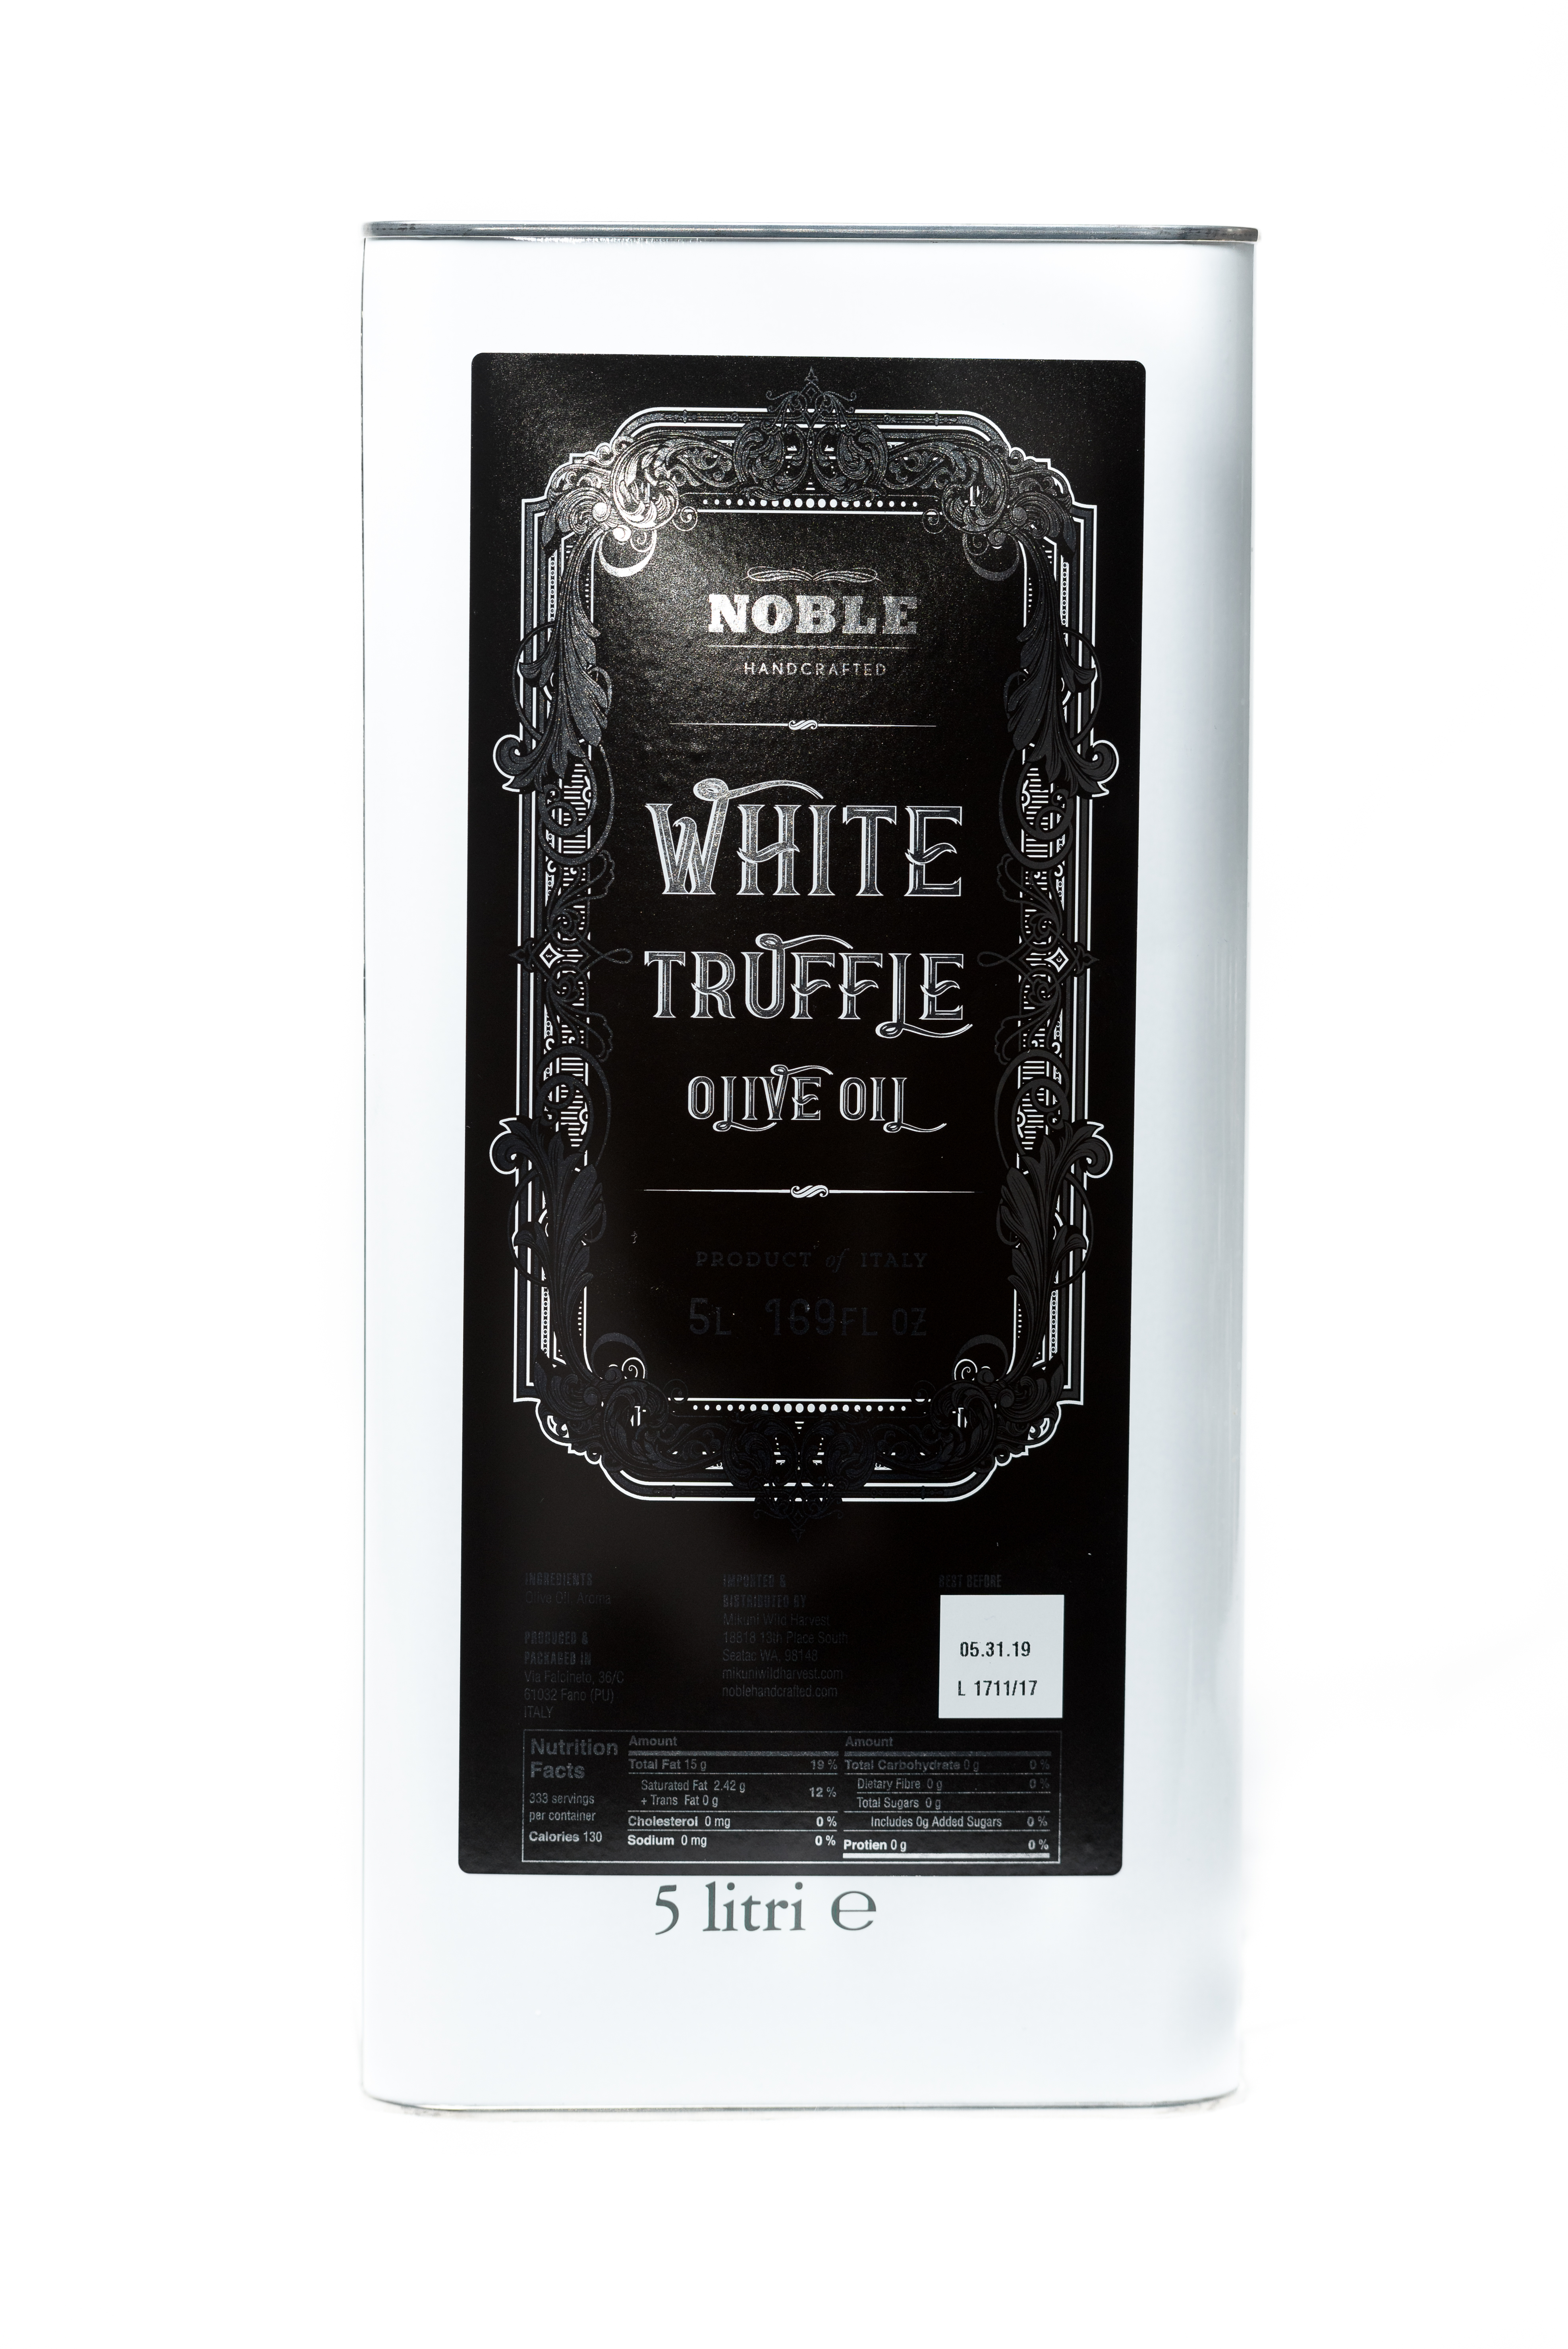 White Truffle Oil, Noble Handcrafted / 5L